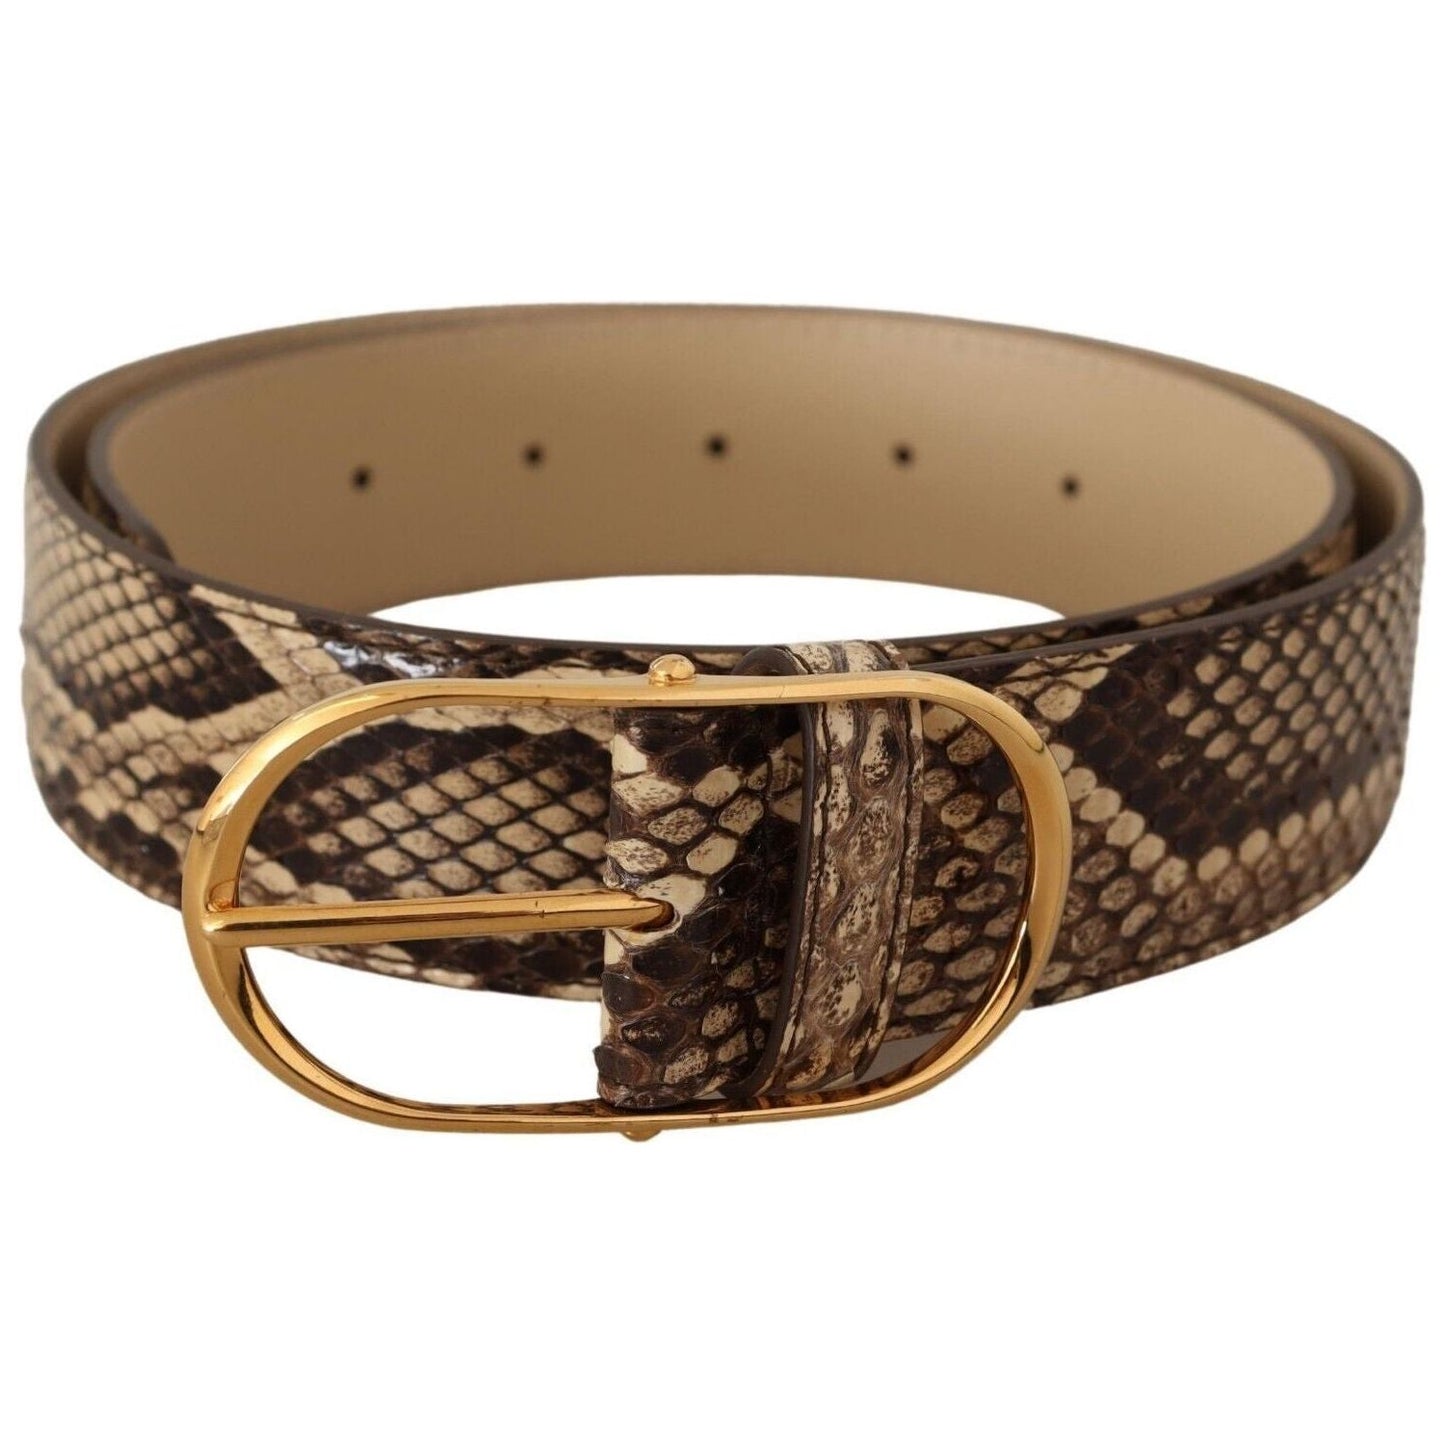 Dolce & Gabbana Elegant Phyton Leather Belt with Gold Buckle WOMAN BELTS brown-exotic-leather-gold-oval-buckle-belt-1